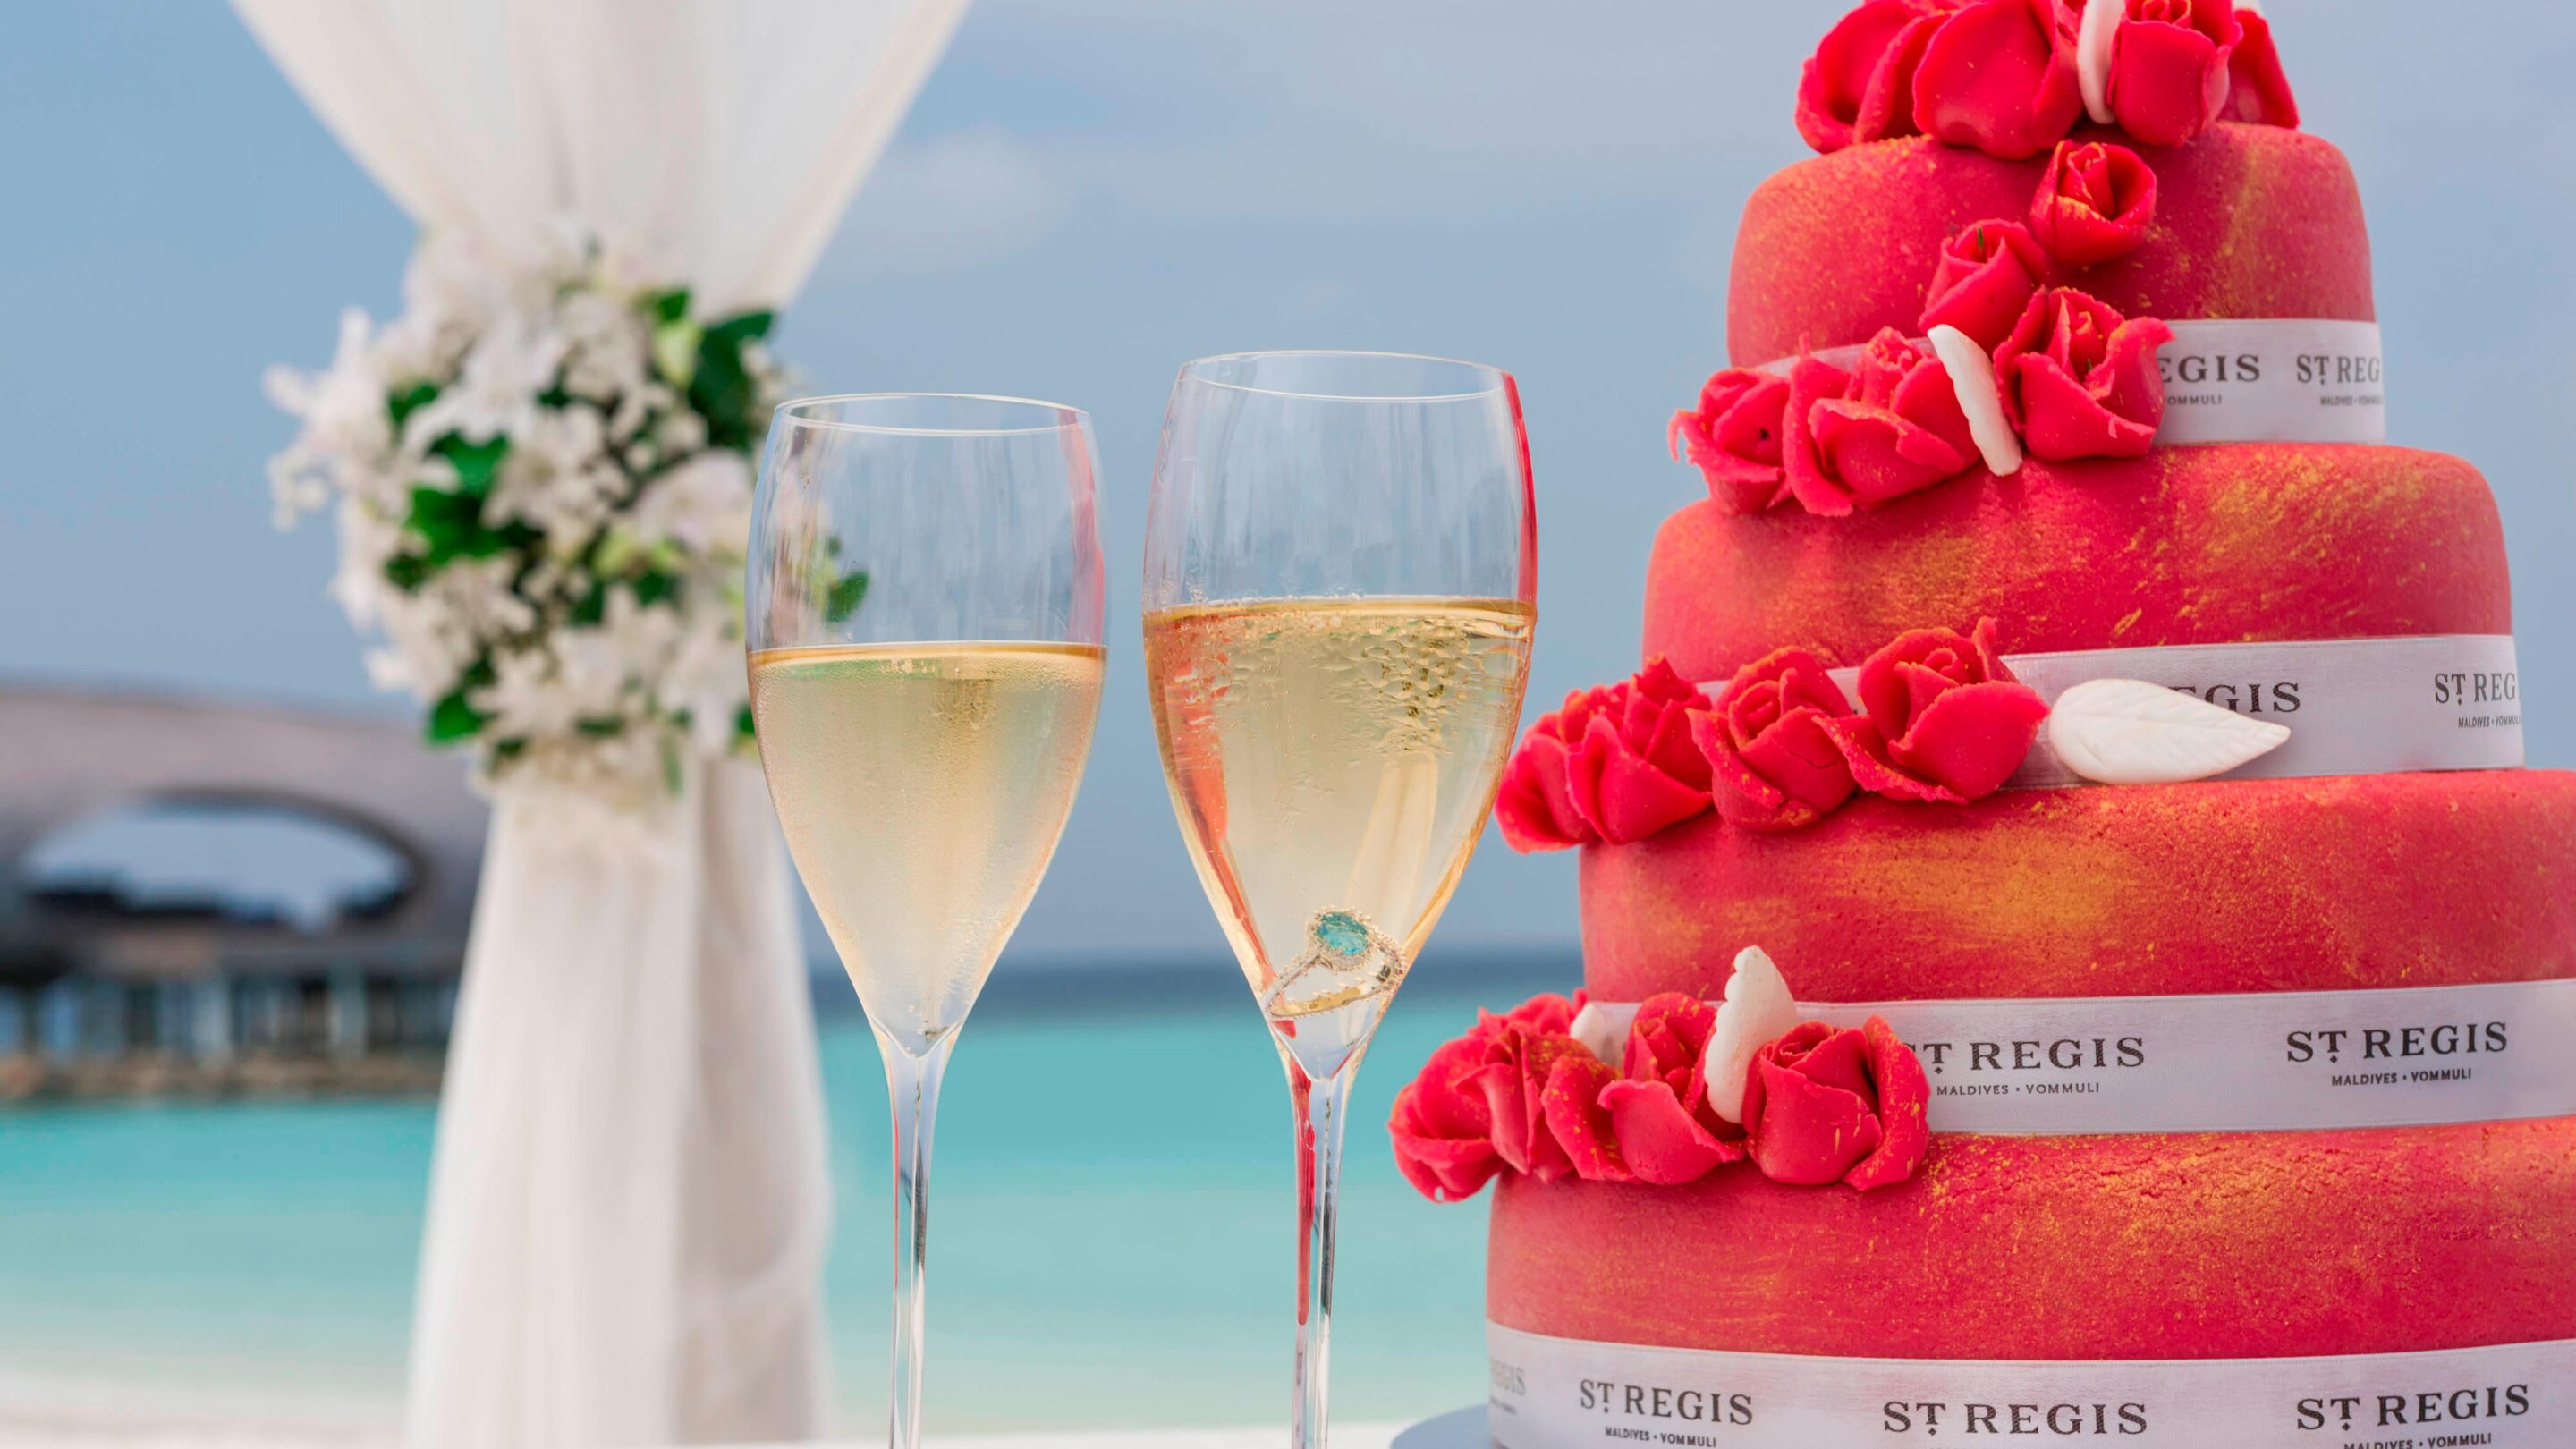 Red wedding cake, two champagne glasses overlooking the Ocean